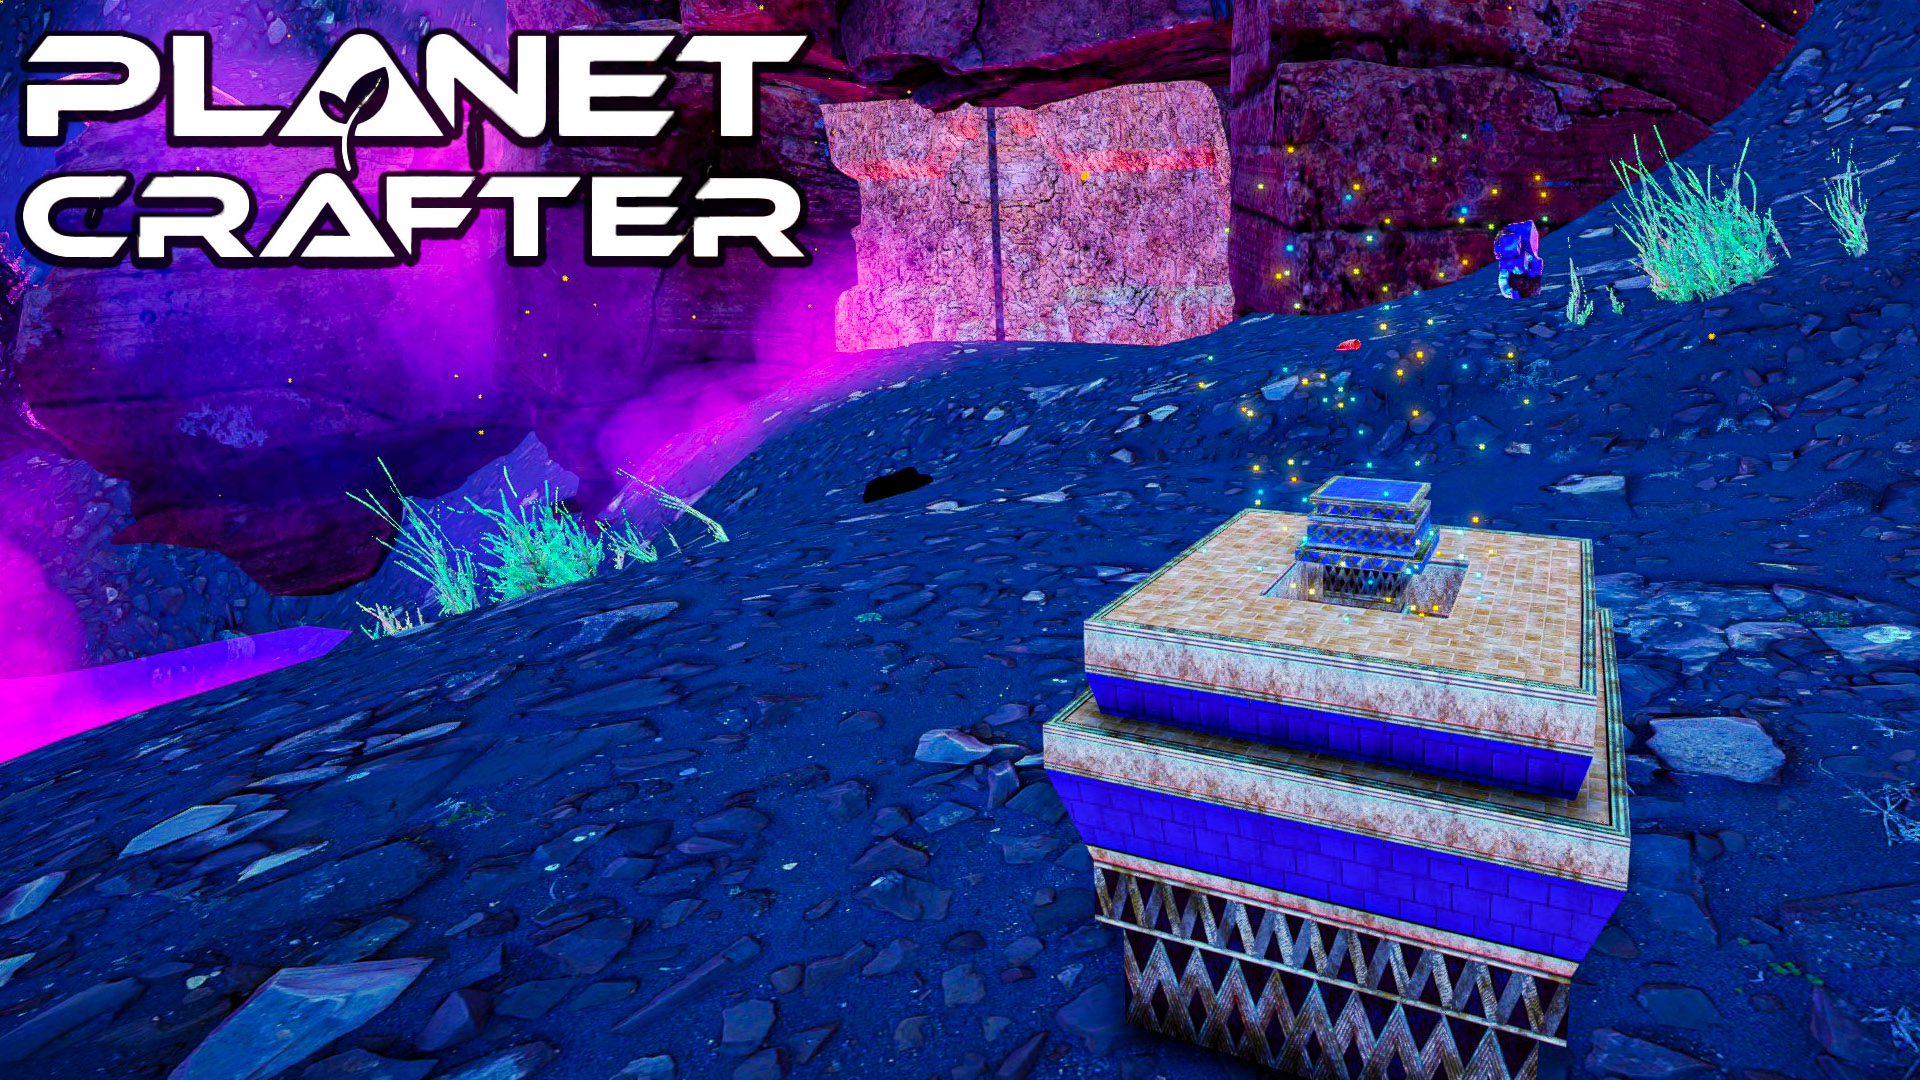 Planet crafter читы. Planet Crafter биомы. Planet Crafter постройки. Planet Crafter рыбы. Planet Crafter водопад.